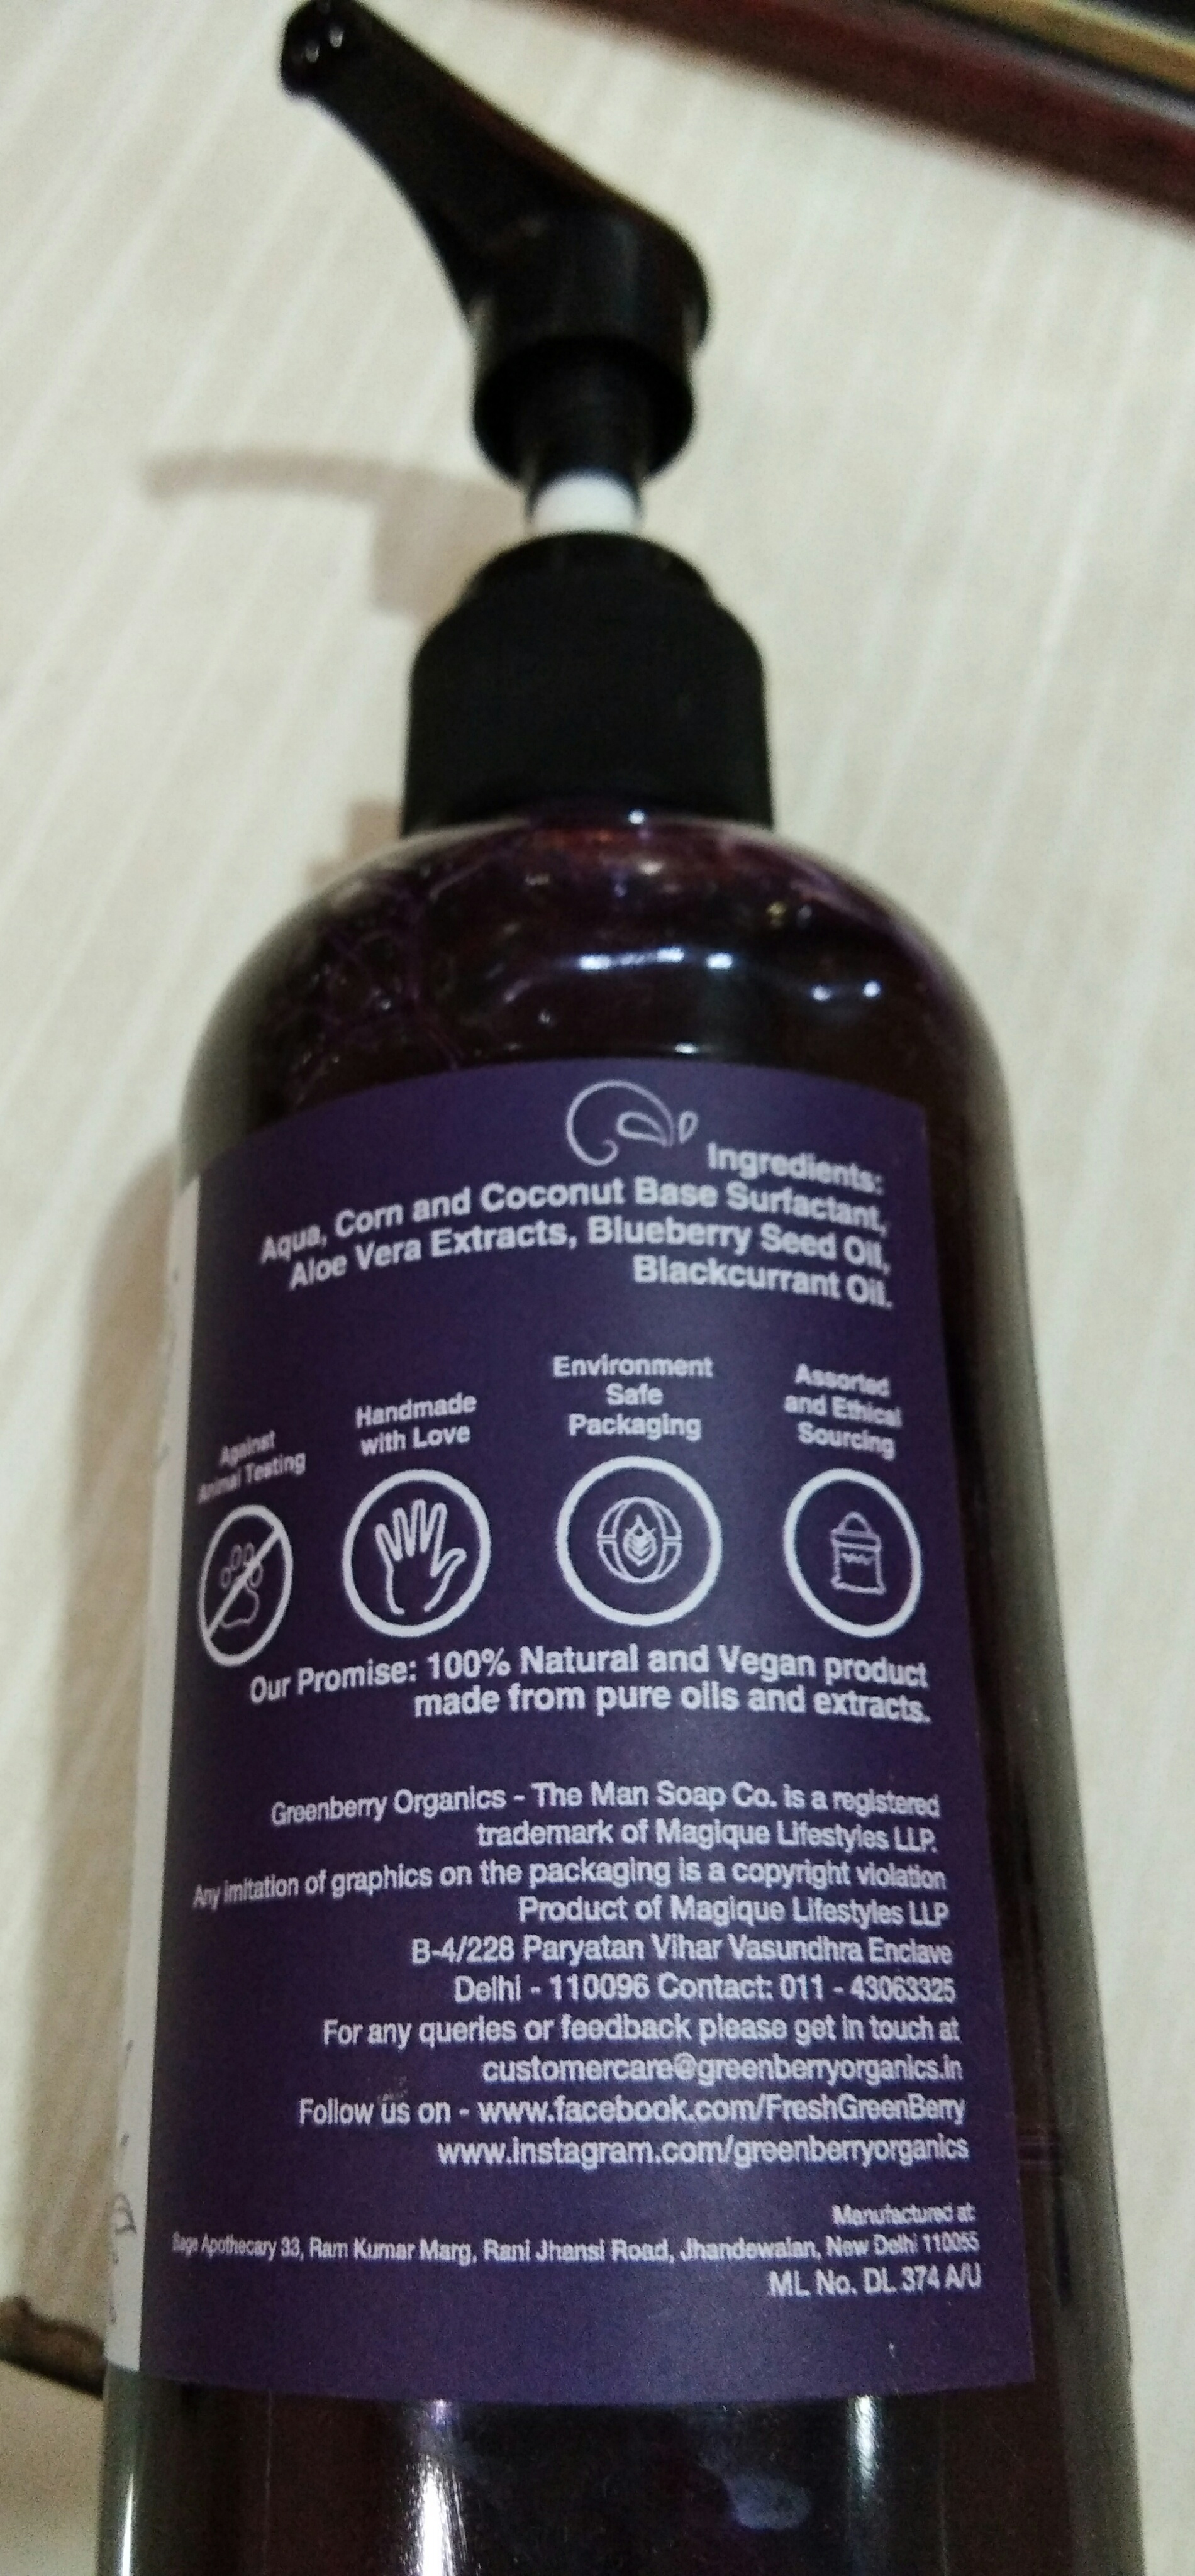 GreenBerry Organics Blueberry And Blackcurrant Body Wash Gel image